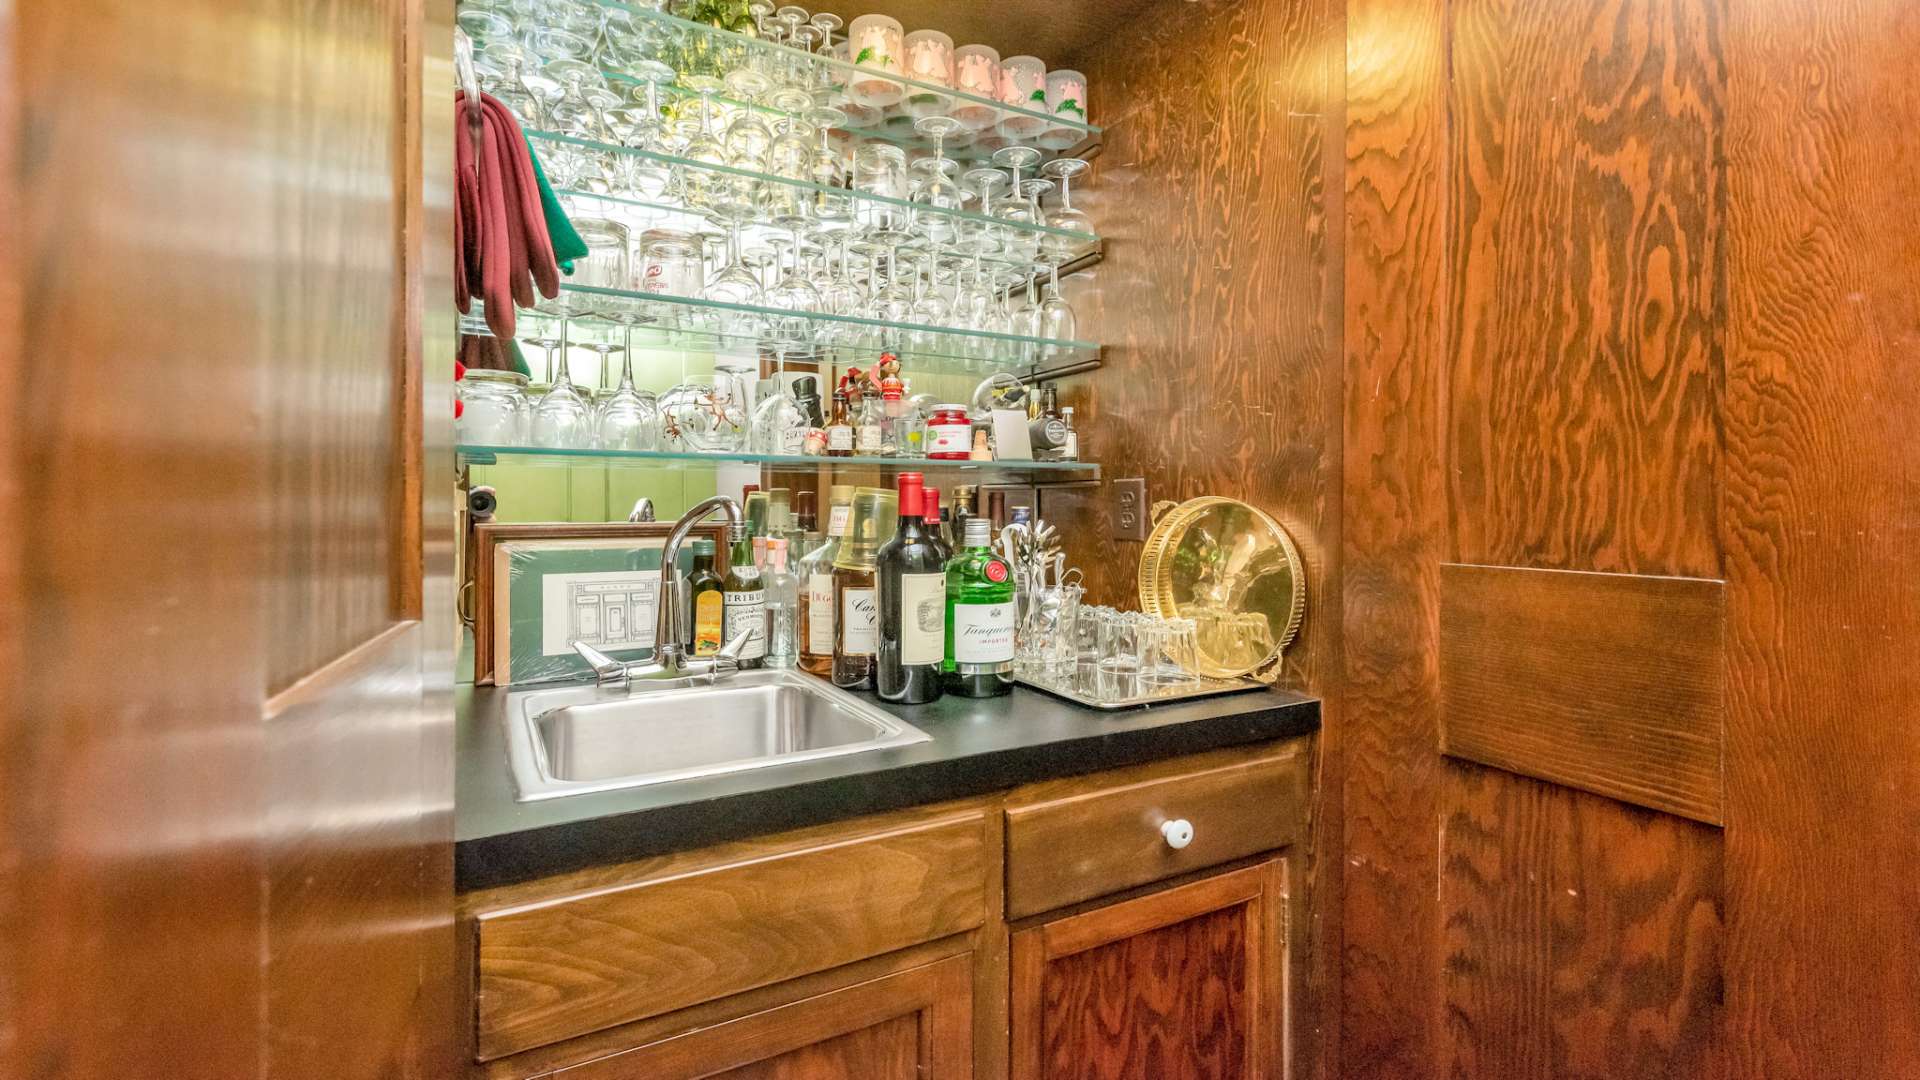 This wet bar area is sure to please any barista.